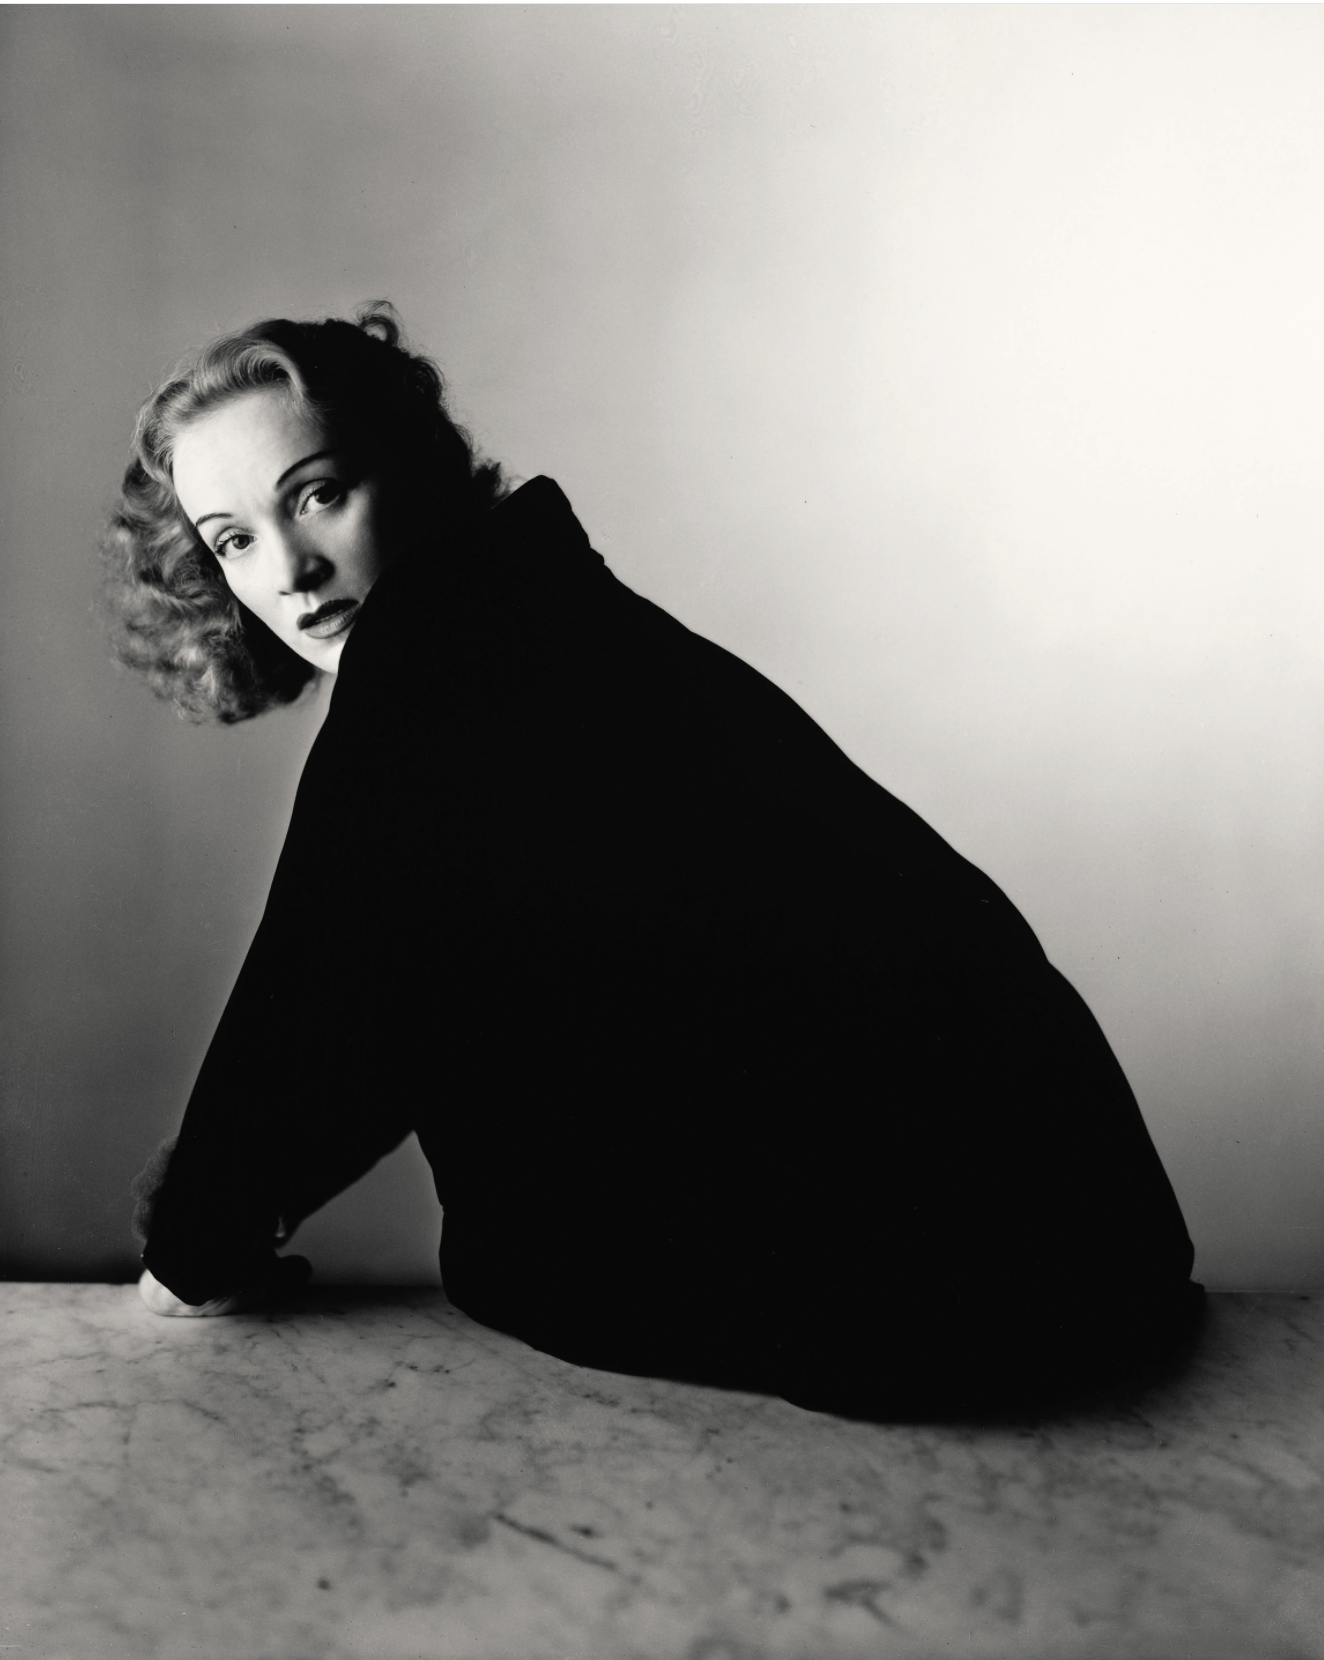 Actress Marlene Dietrich turning her head to look at the camera